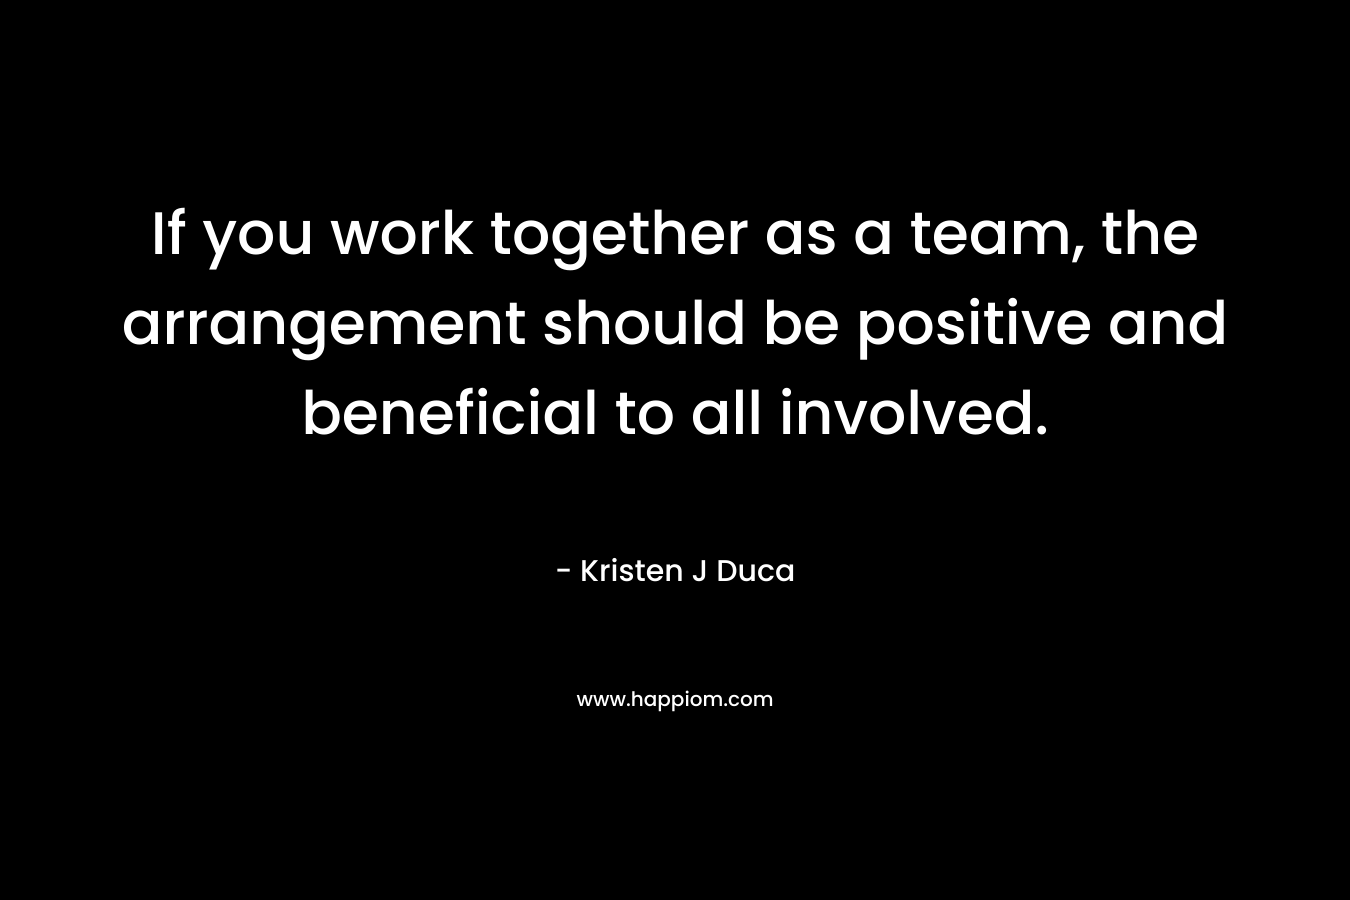 If you work together as a team, the arrangement should be positive and beneficial to all involved. – Kristen J Duca